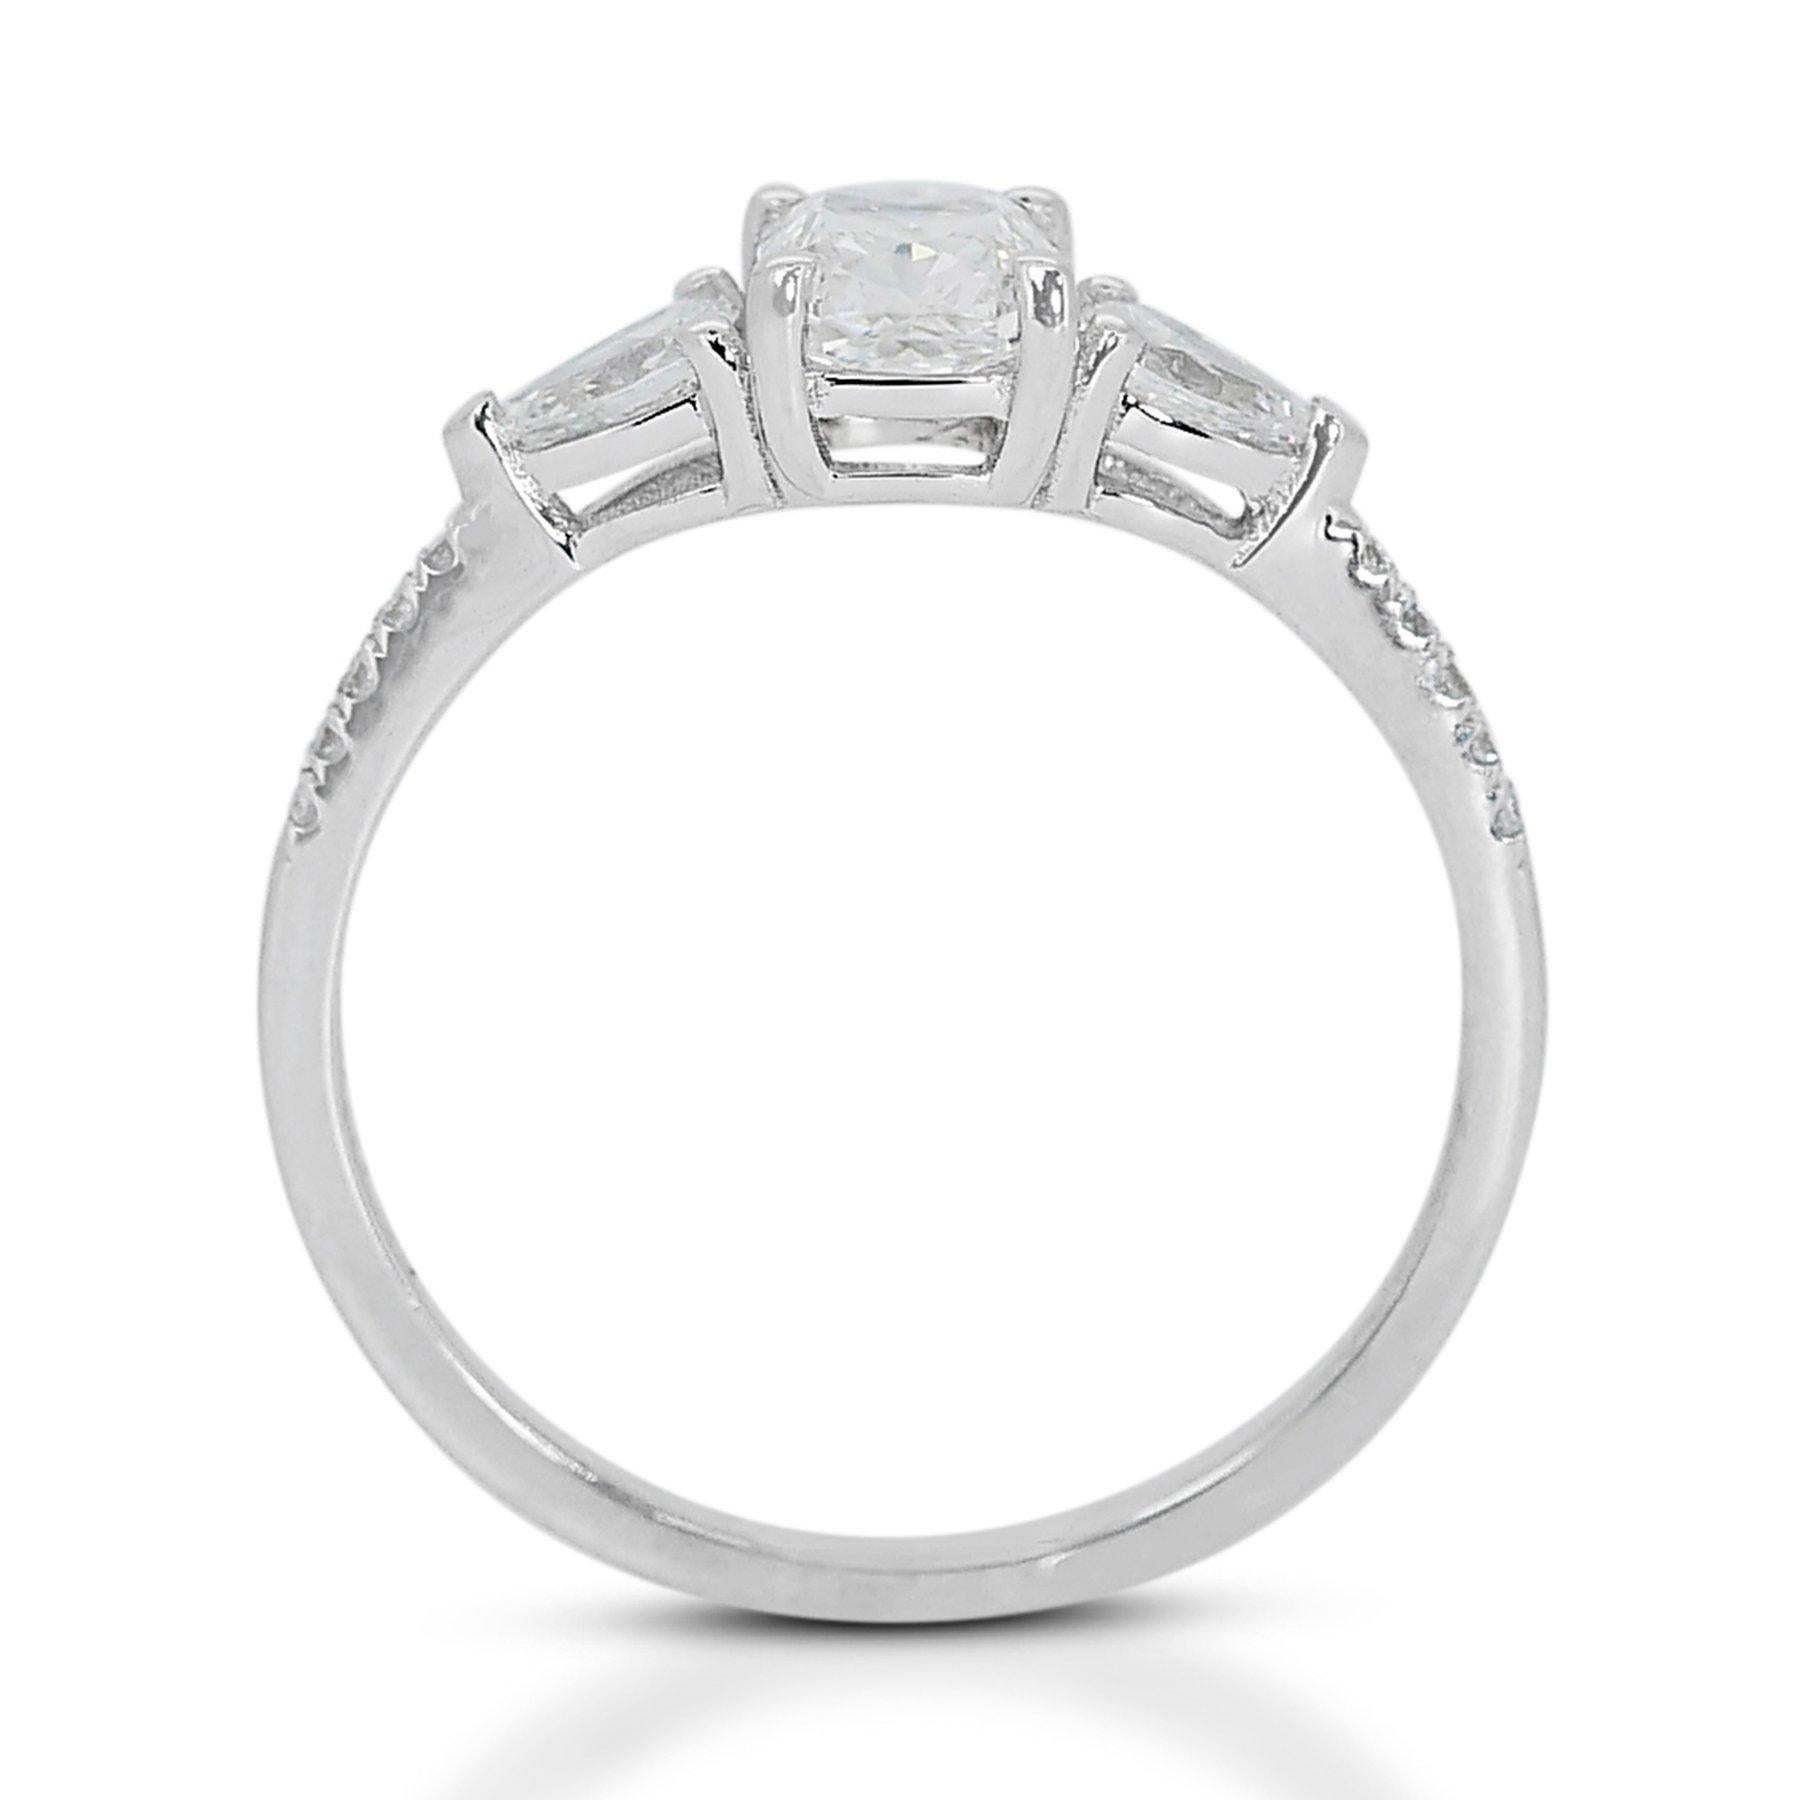 Captivating 0.73ct Diamond 3-Stone Ring in 18k White Gold - GIA Certified For Sale 1